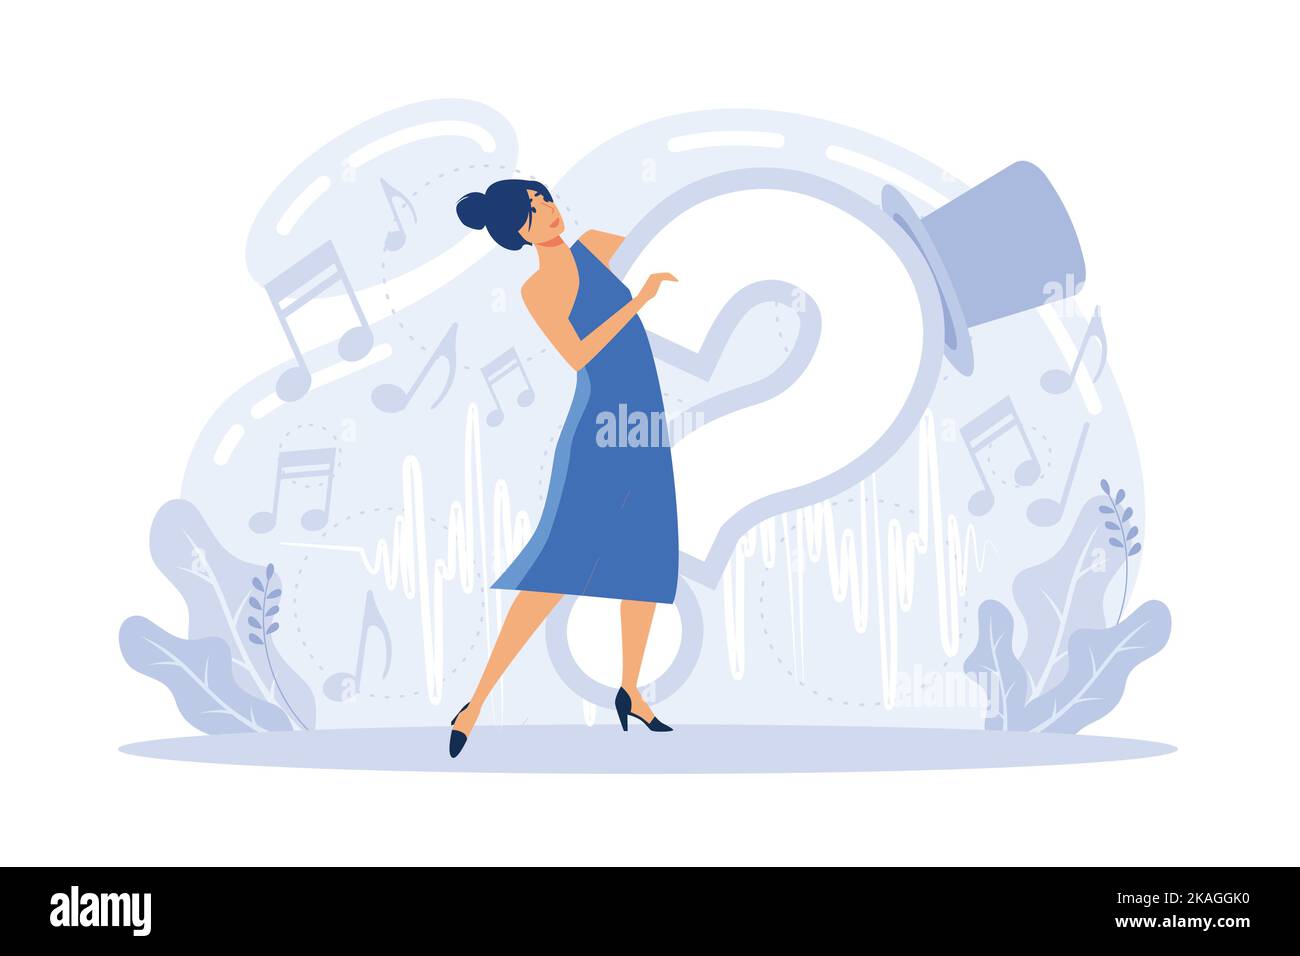 Dilemma of businessman, thinking man thinks and asks himself about next job or project. Career choice, person thinking about something alarming. Peopl Stock Vector